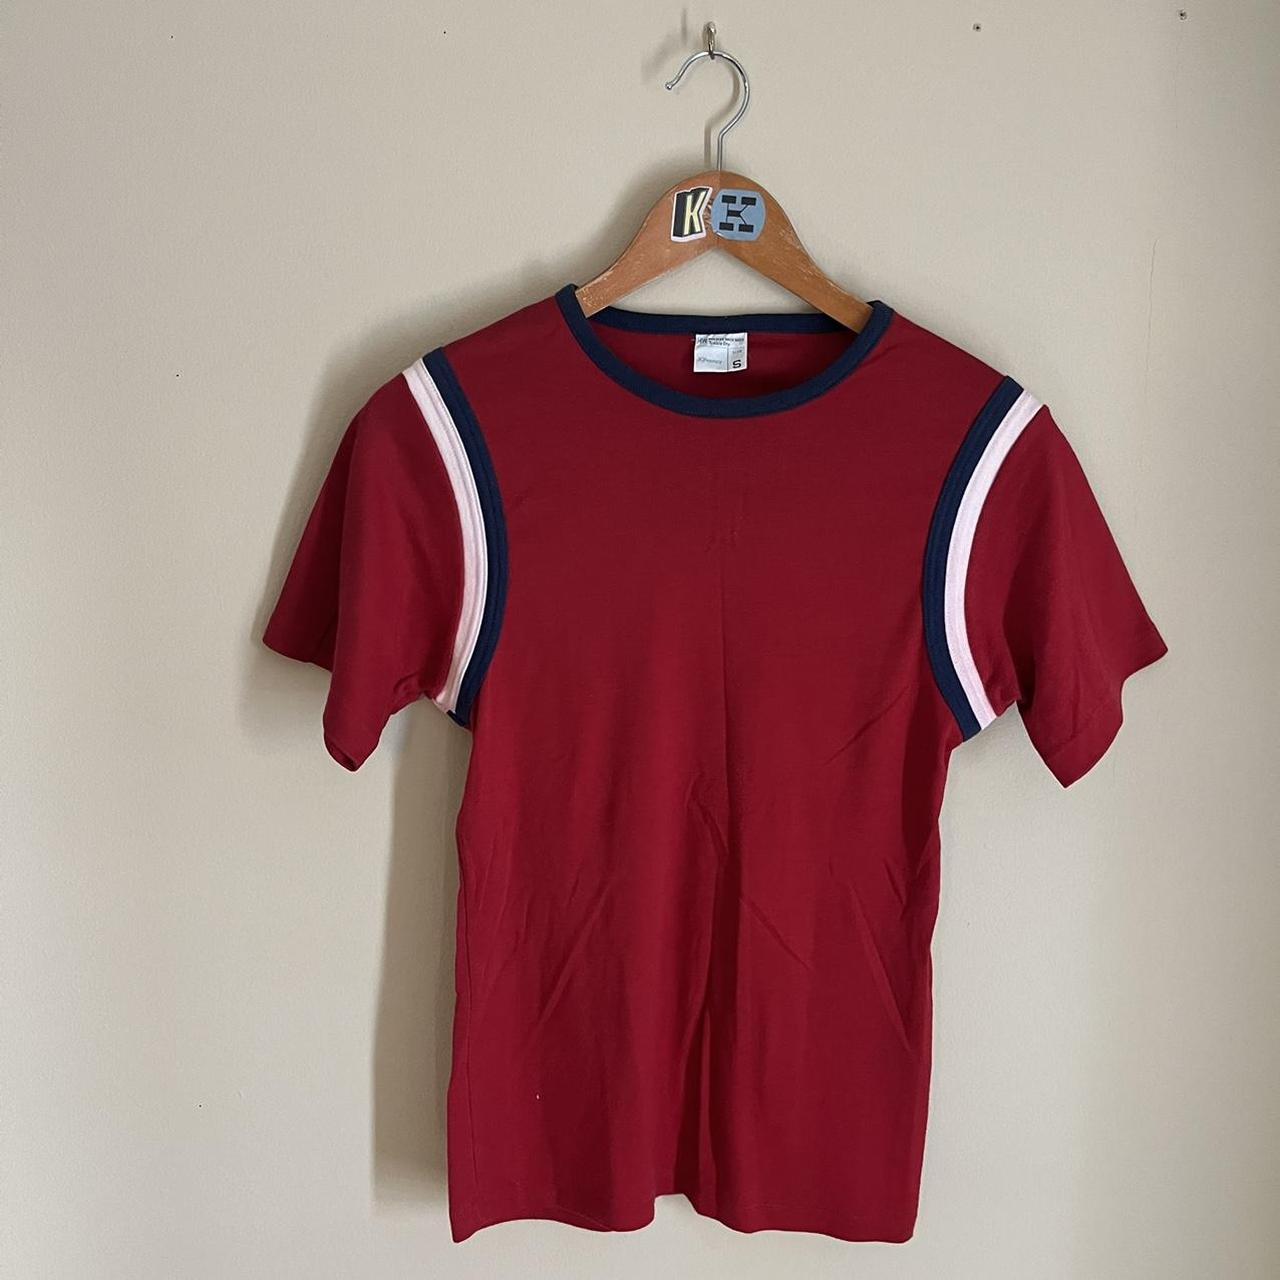 JCPenney Men's Red and Blue T-shirt | Depop